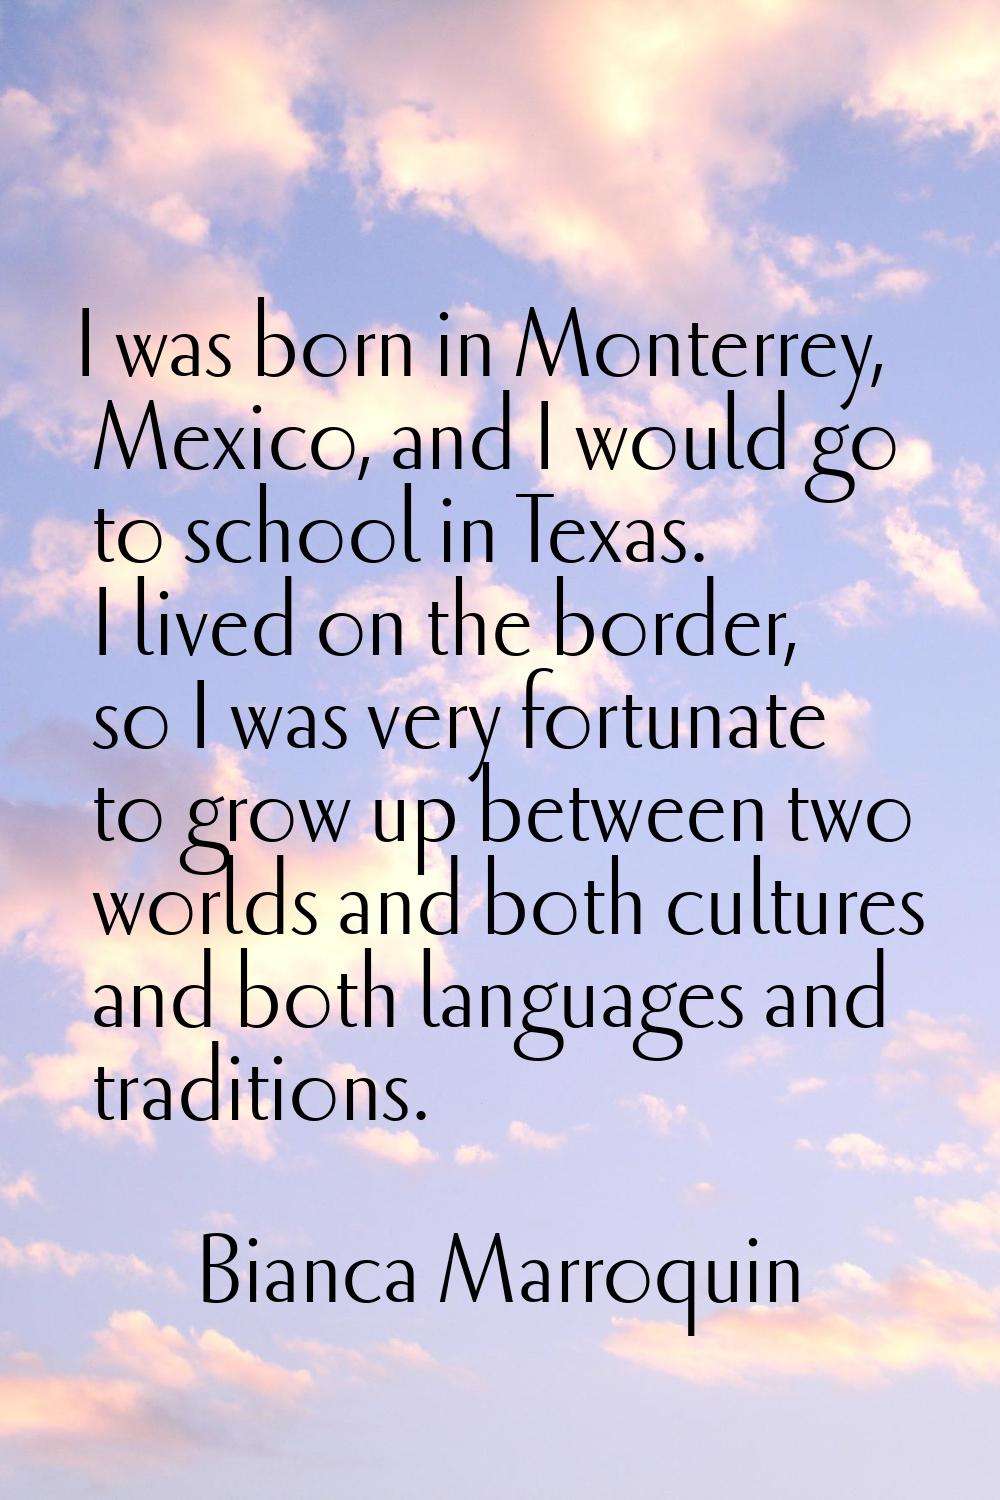 I was born in Monterrey, Mexico, and I would go to school in Texas. I lived on the border, so I was